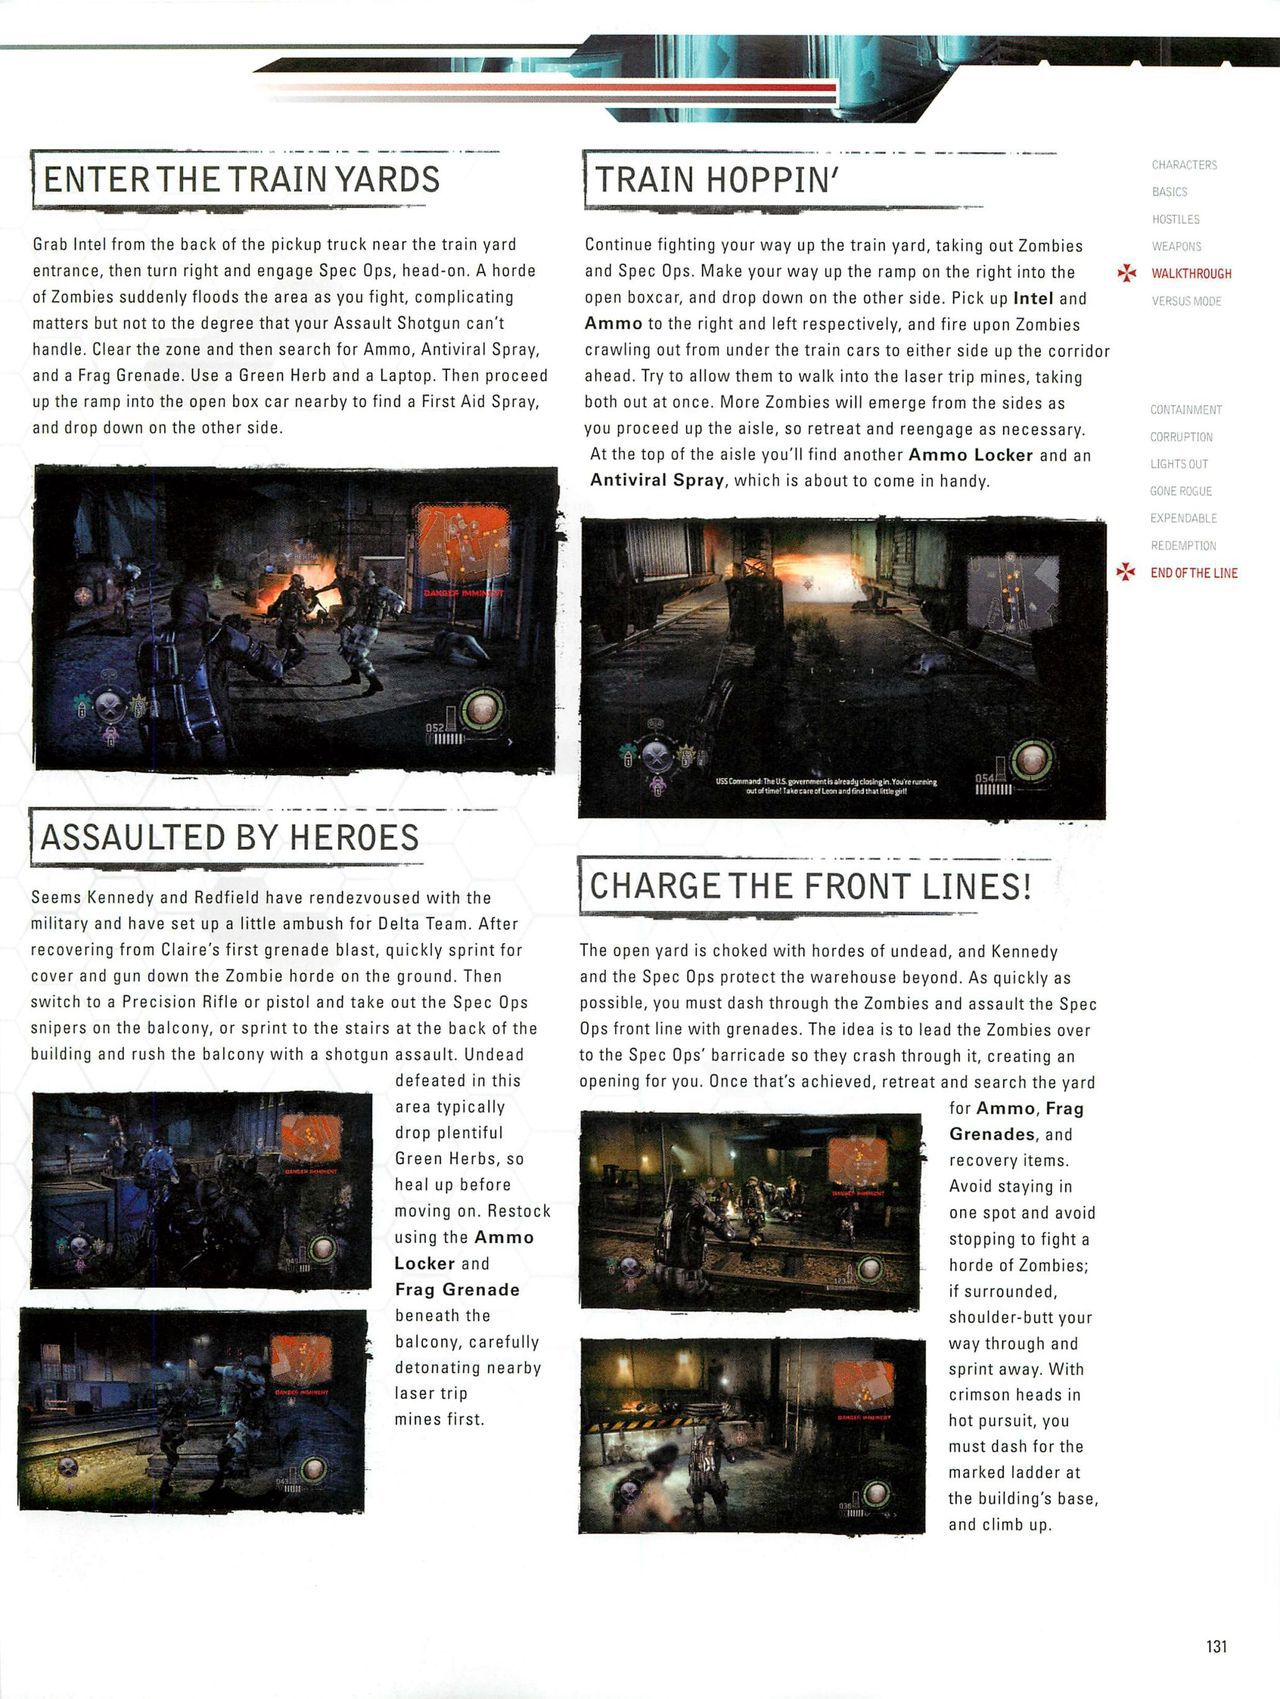 Resident Evil: Operation Raccoon City Official Strategy Guide (watermarked) 133